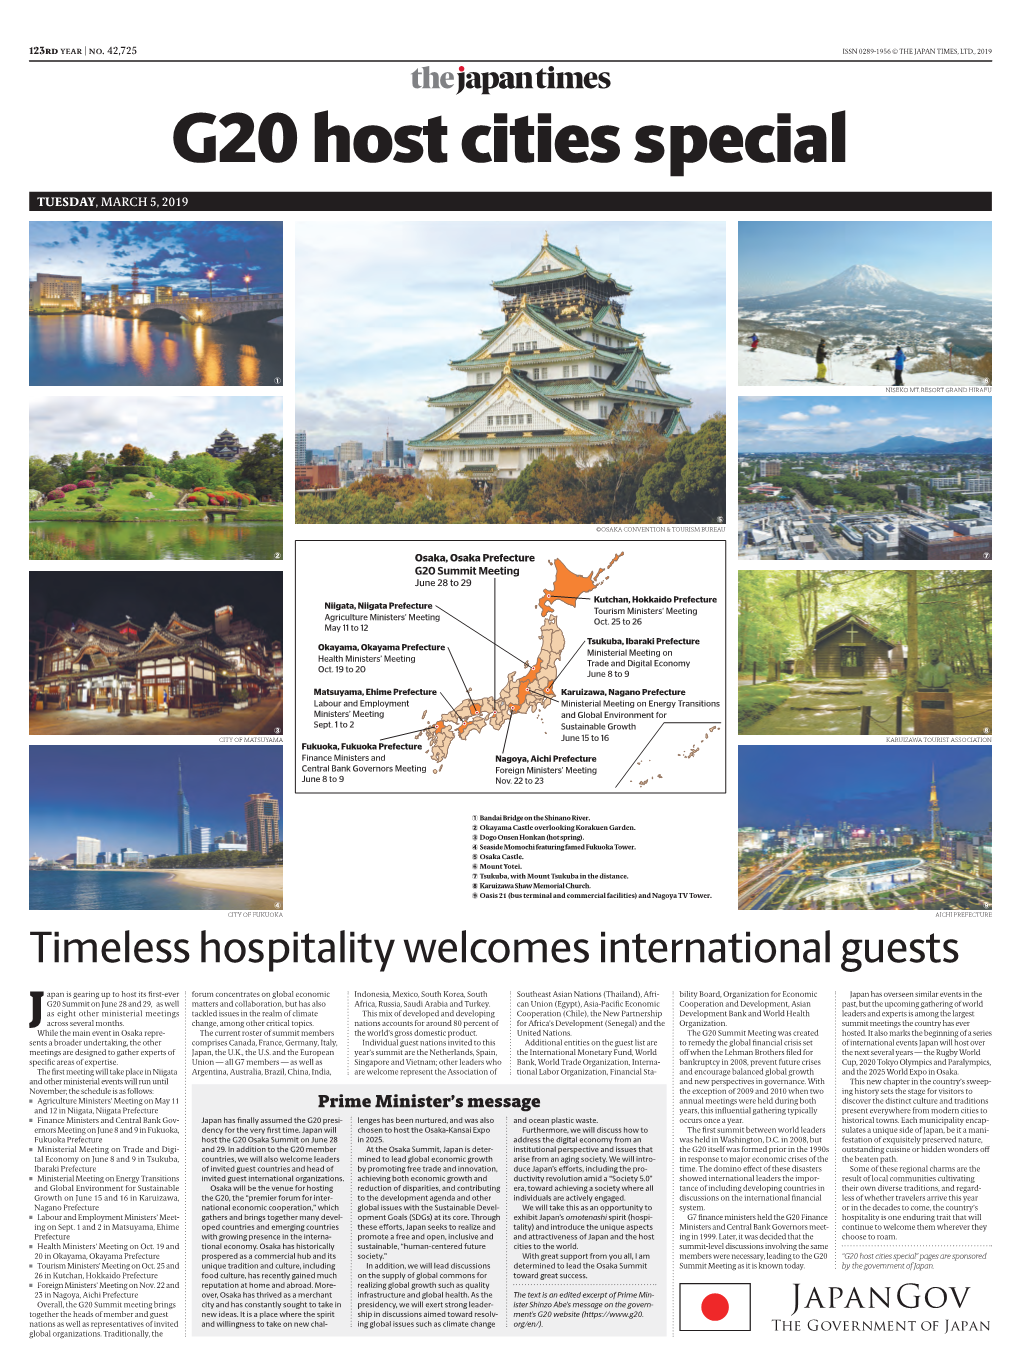 Timeless Hospitality Welcomes International Guests